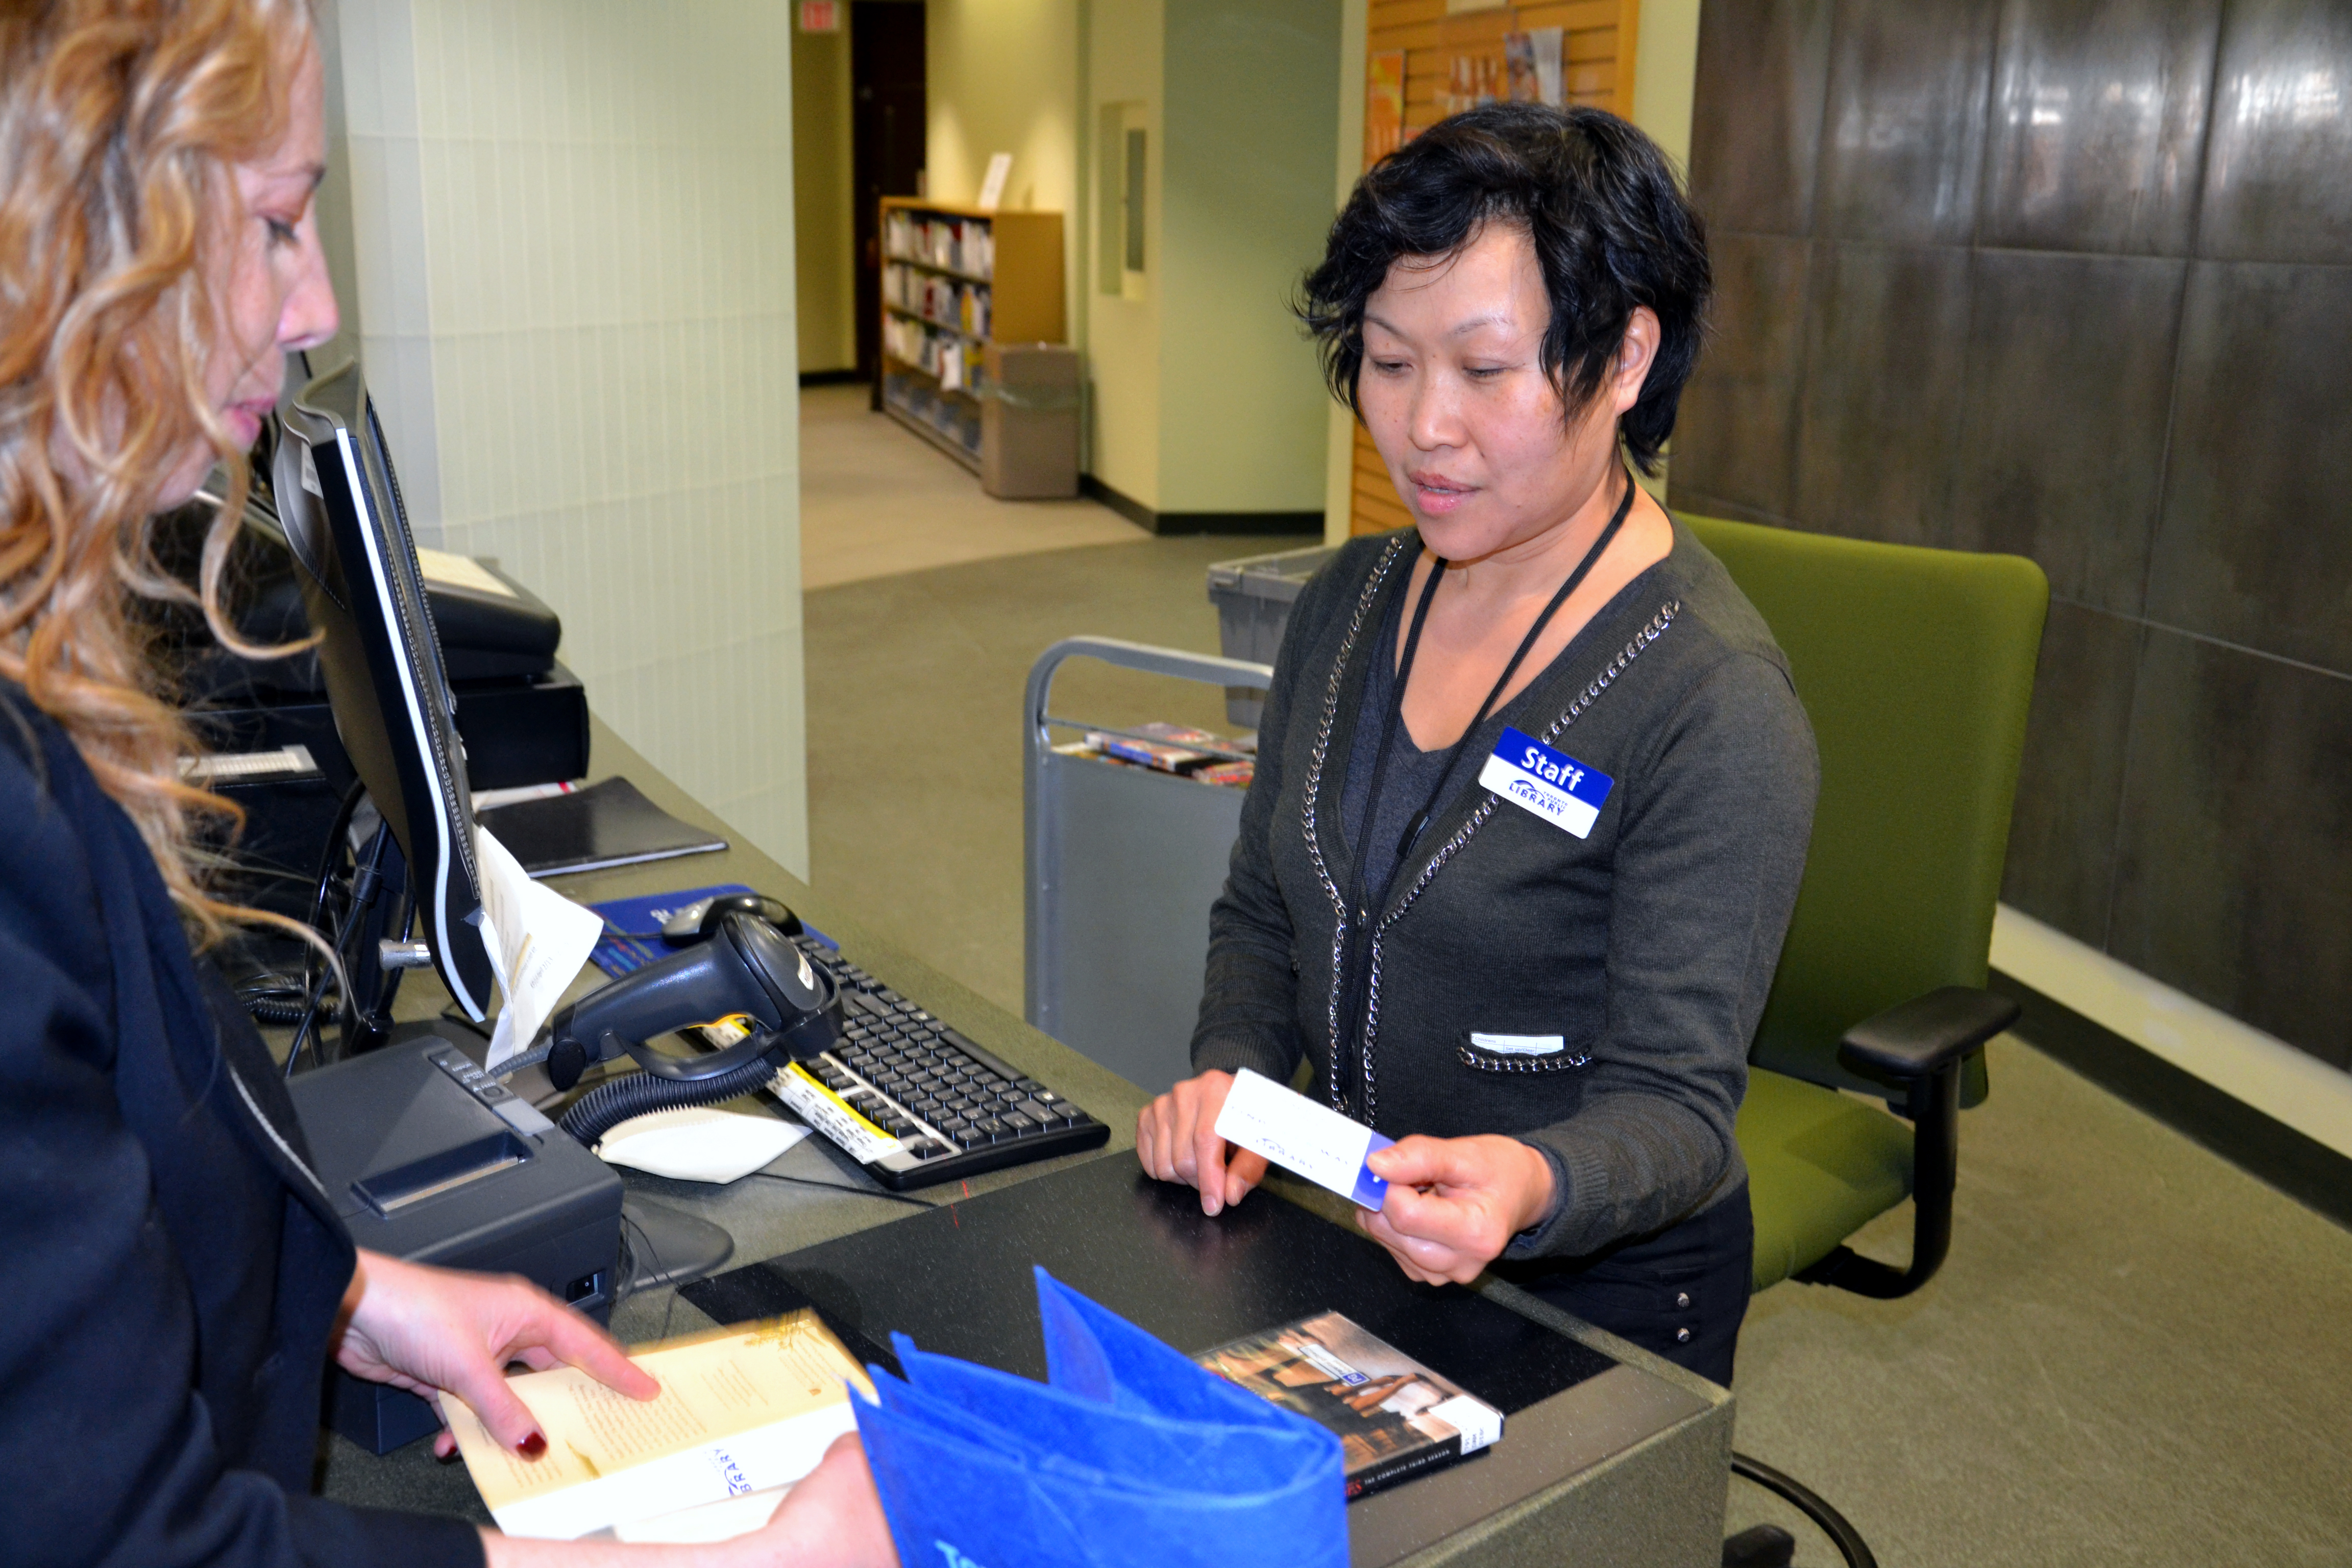 A library worker hands a library card to a library patron